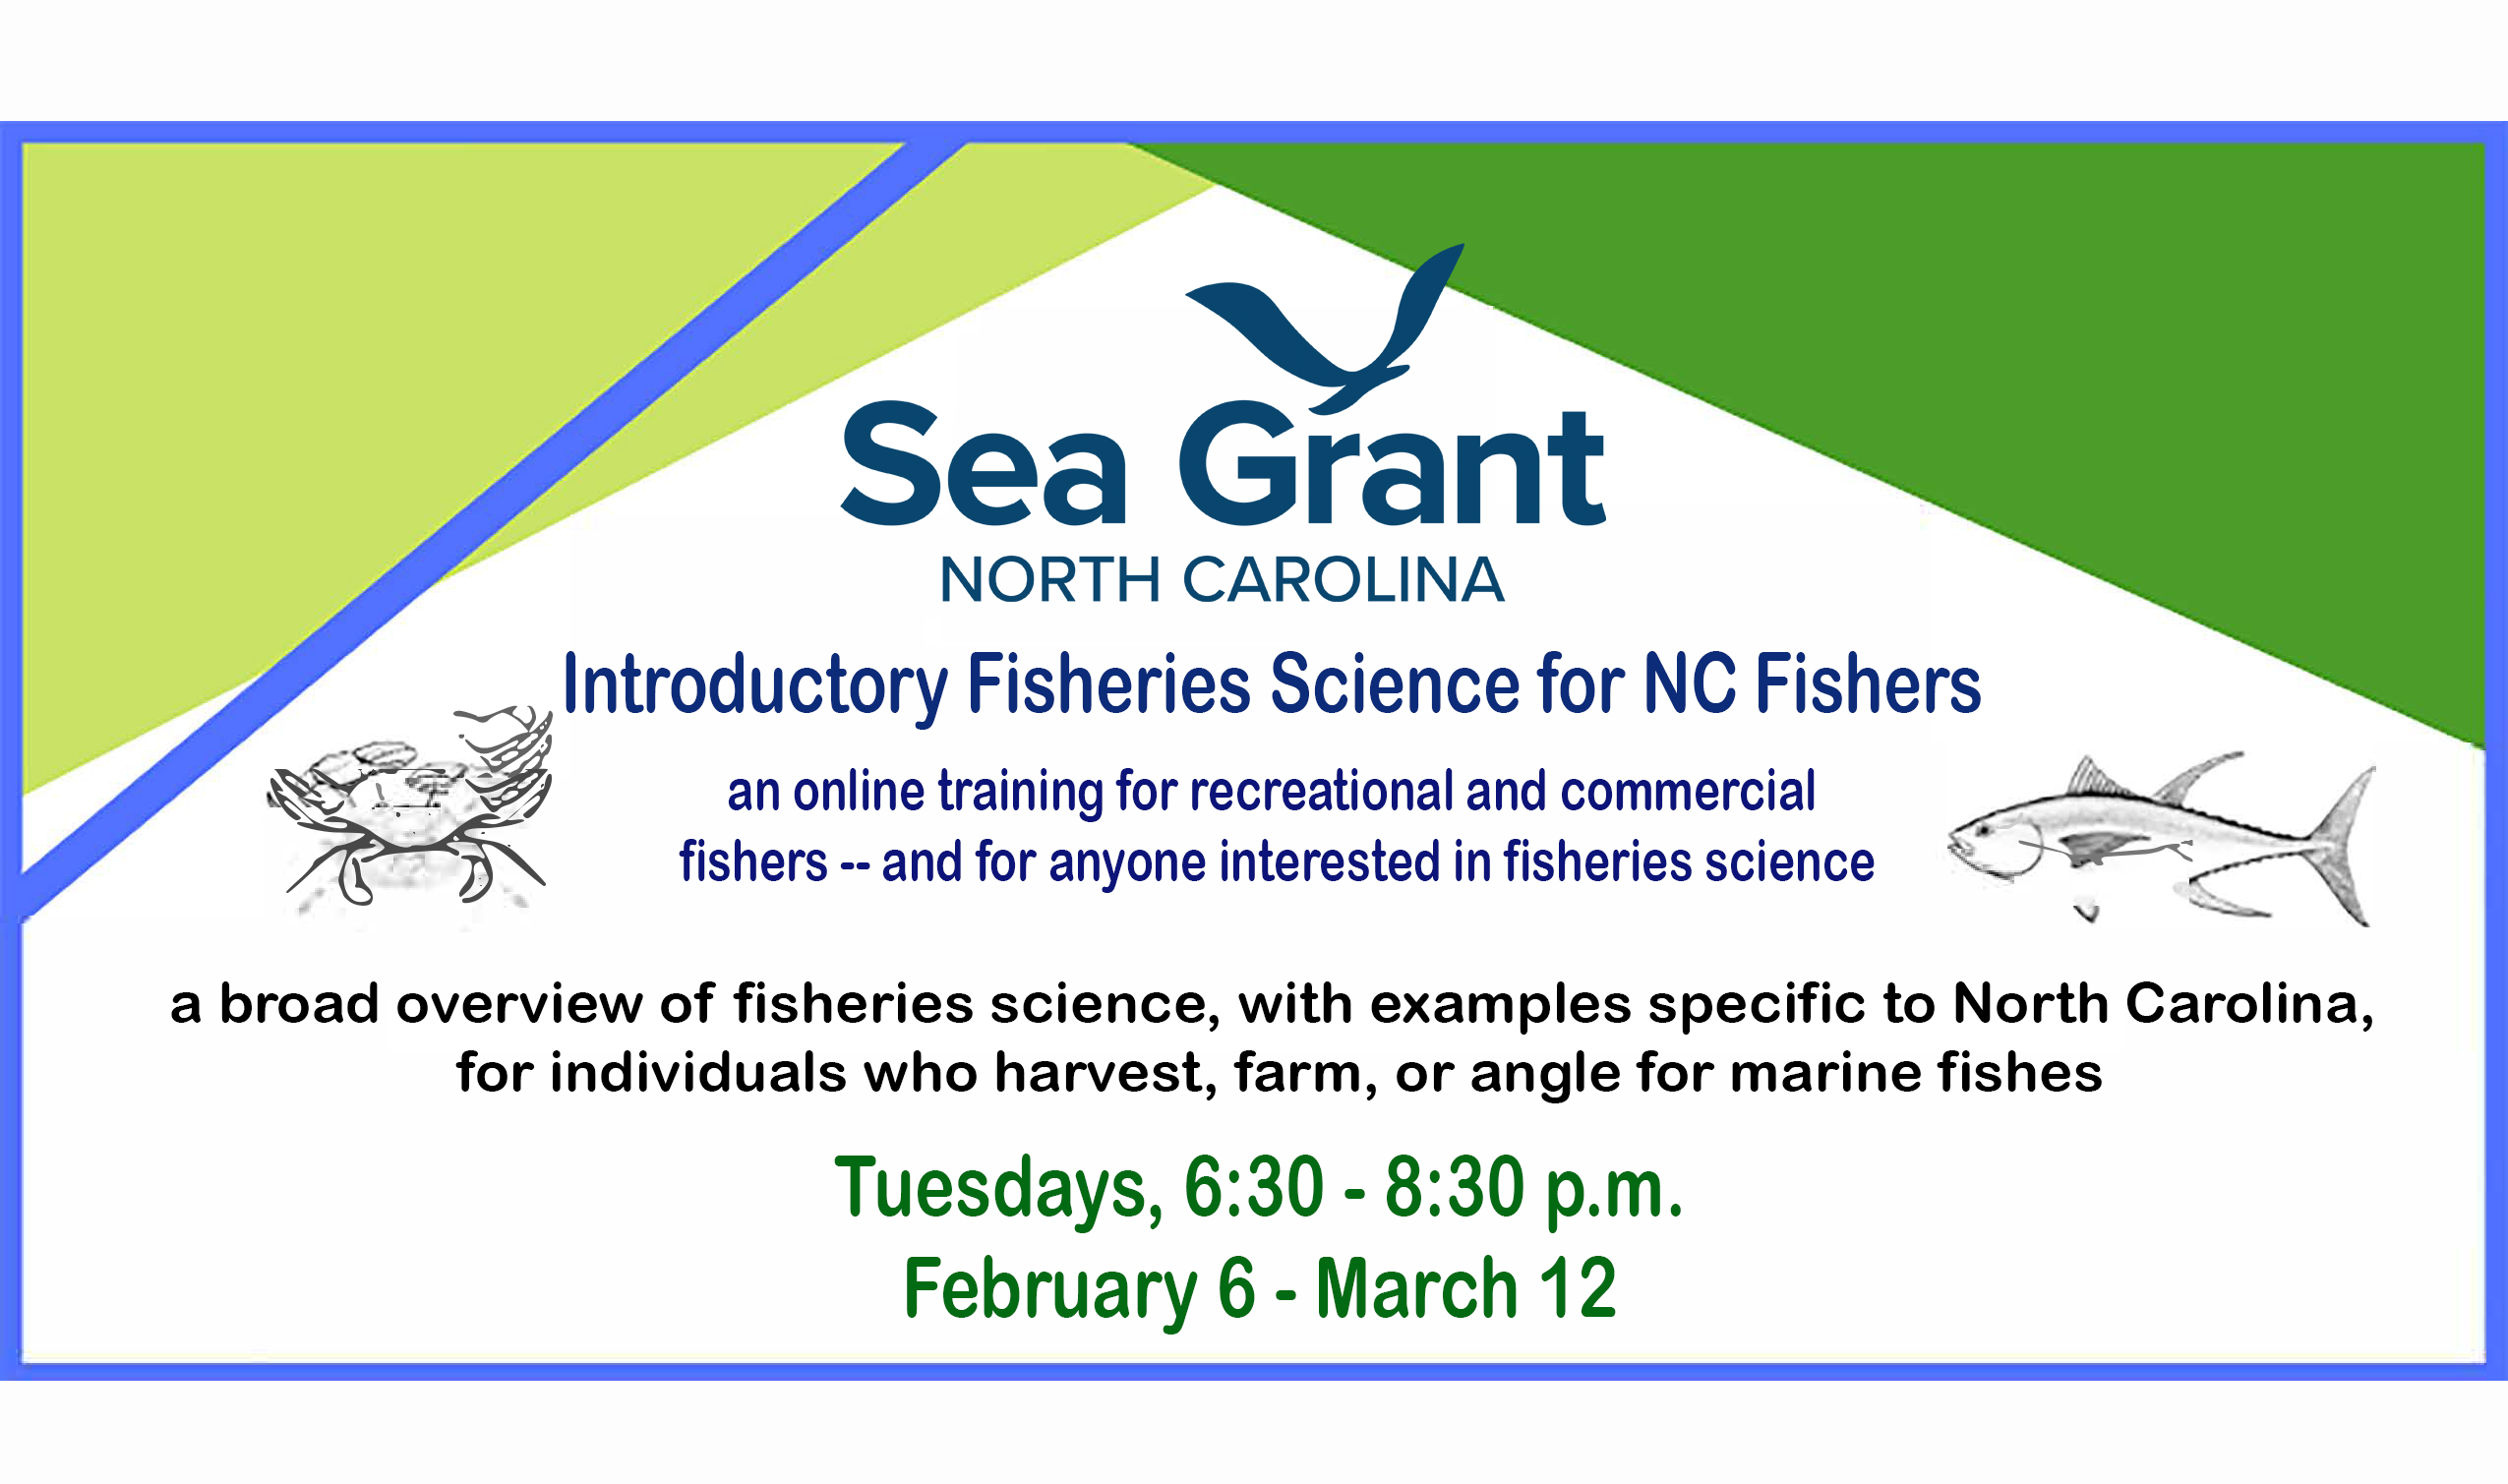 image: fisheries science flyer, top 1/3